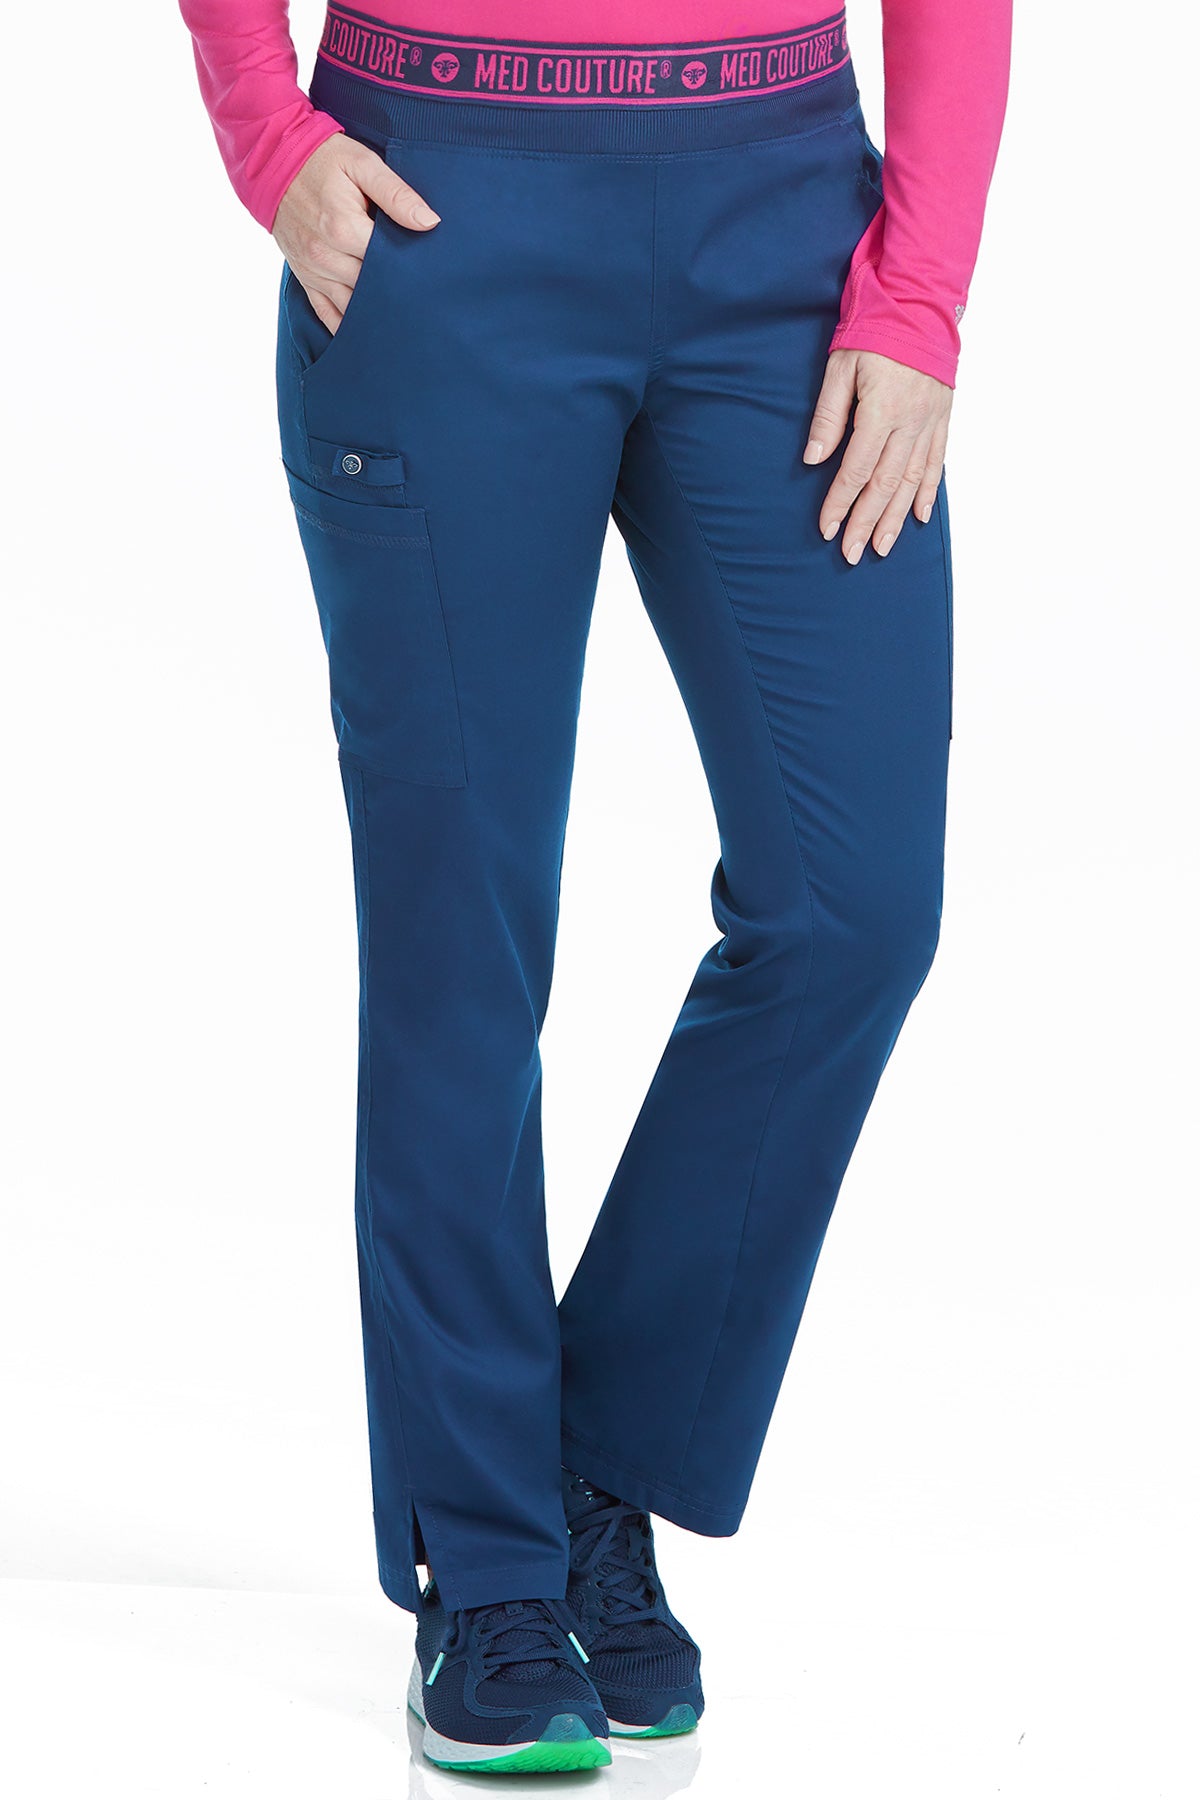 Med Couture Scrub Pants Touch Ally Yoga Pant in Navy at Parker's Clothing and Shoes.